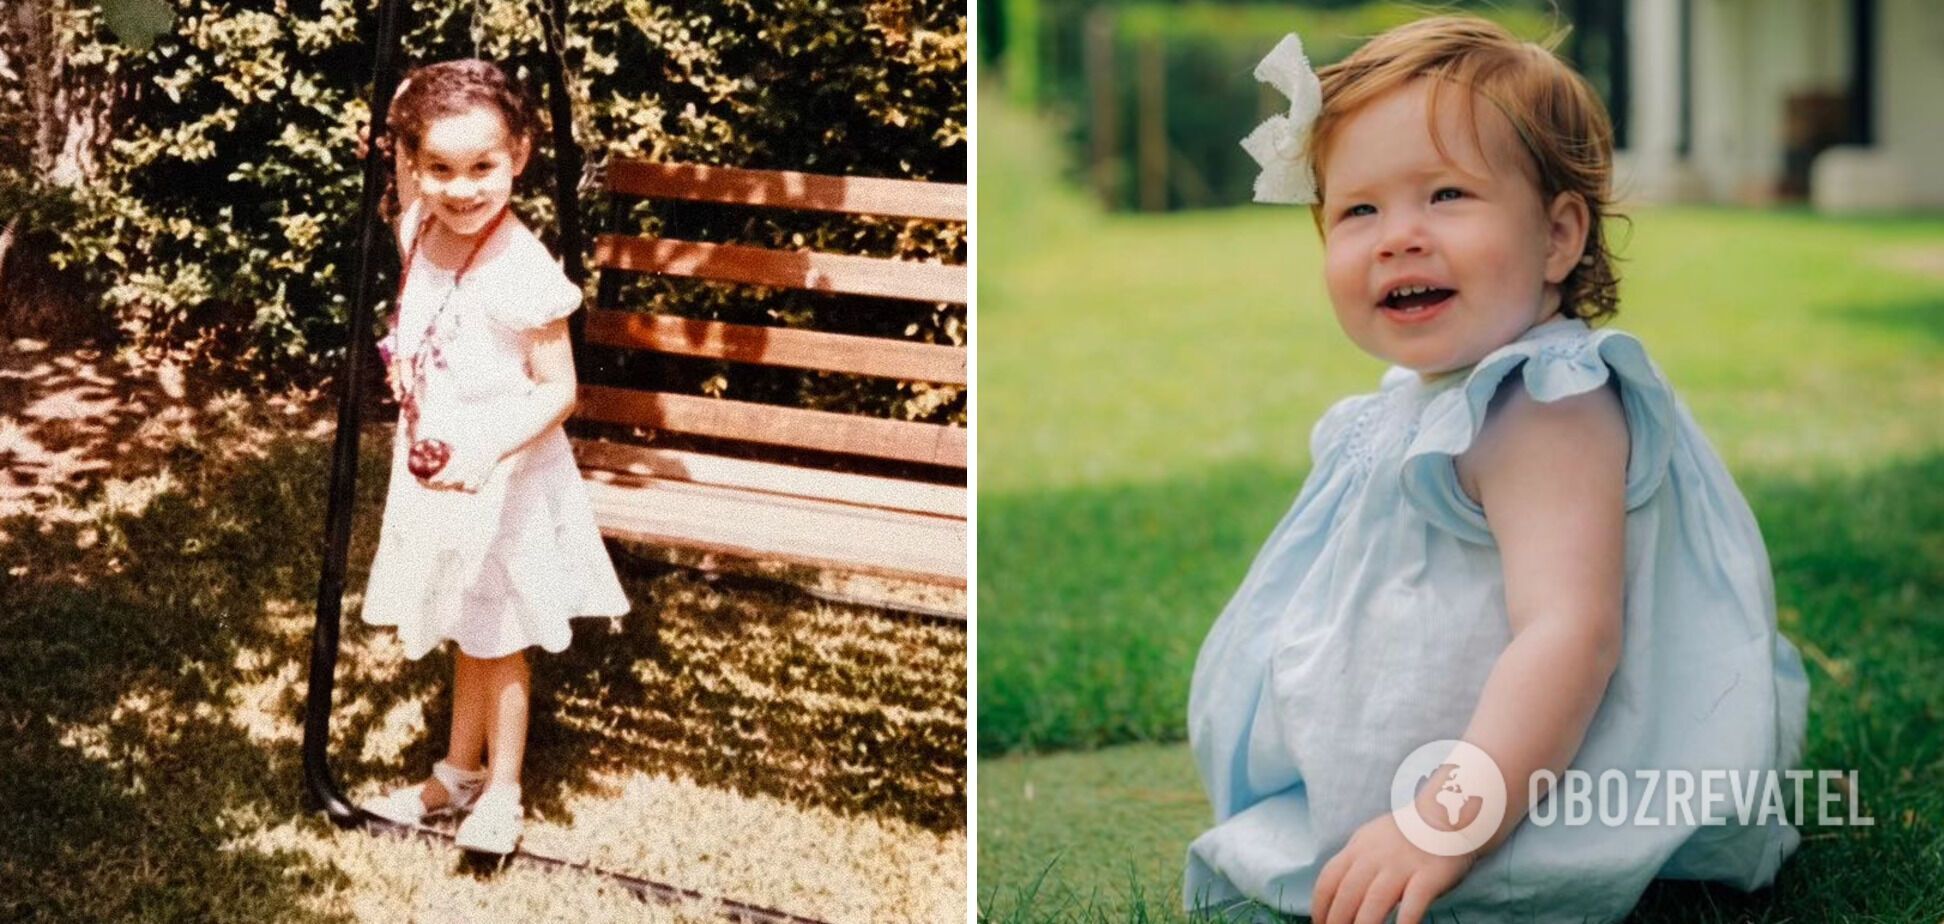 Almost like Lilibet: Meghan Markle's cousin shared a rare photo from her childhood